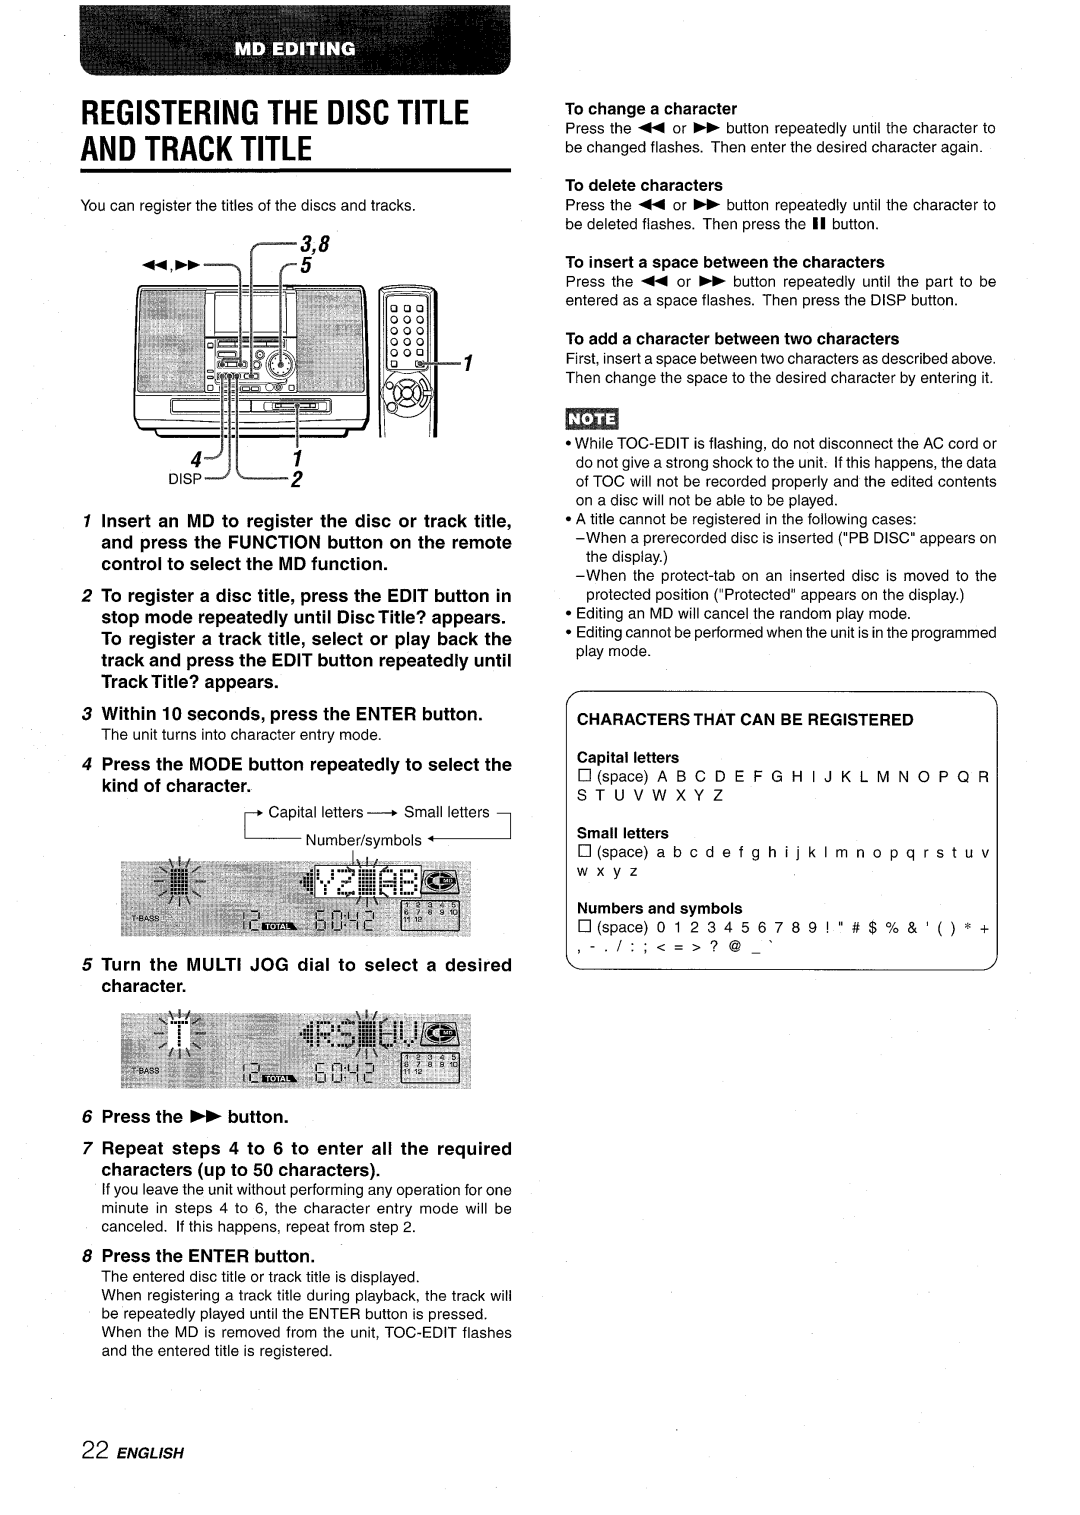 Aiwa CSD-MD50 manual Registering The Disc Title And Track Title 